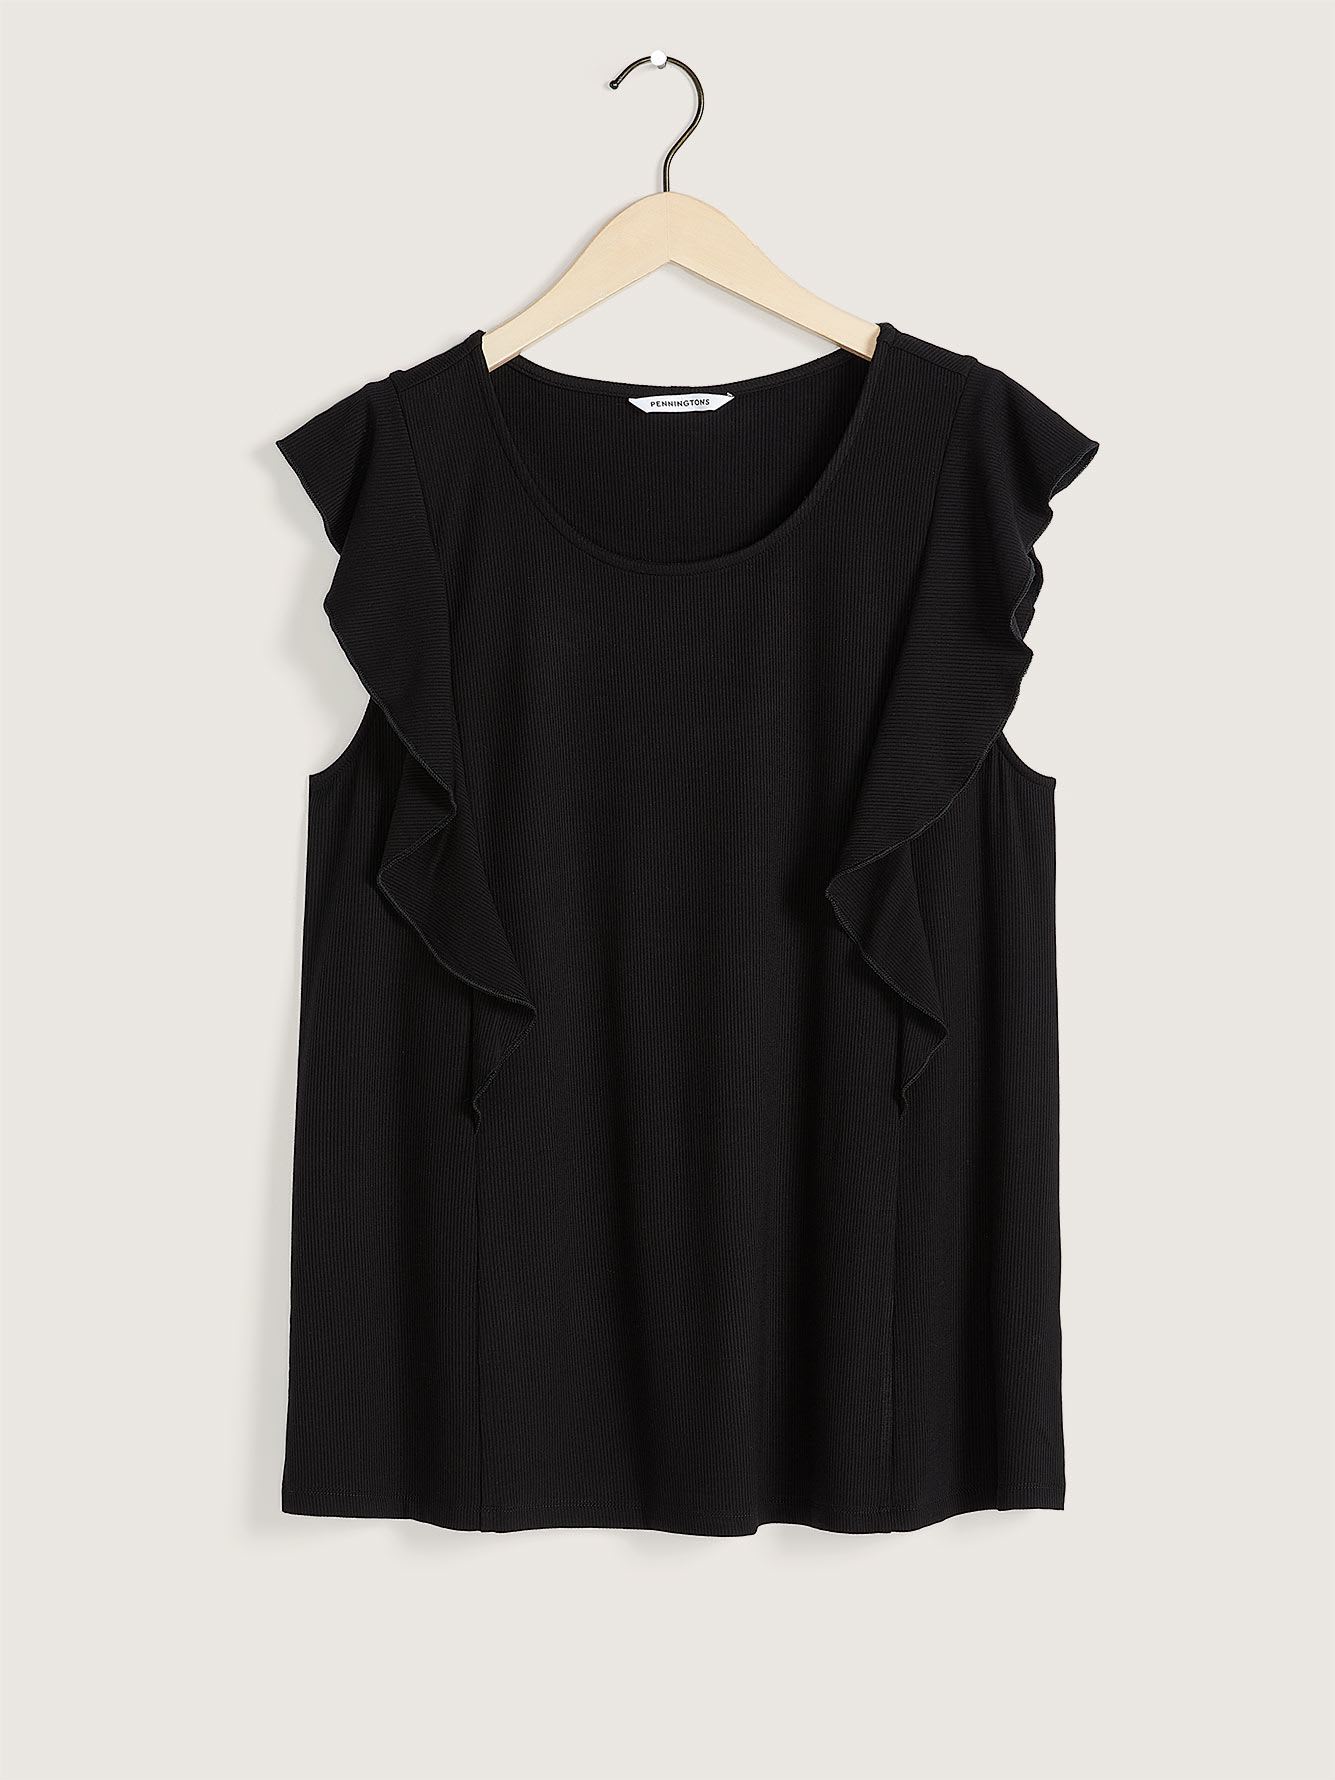 Sleeveless Crew-Neck Knit Top with Frills